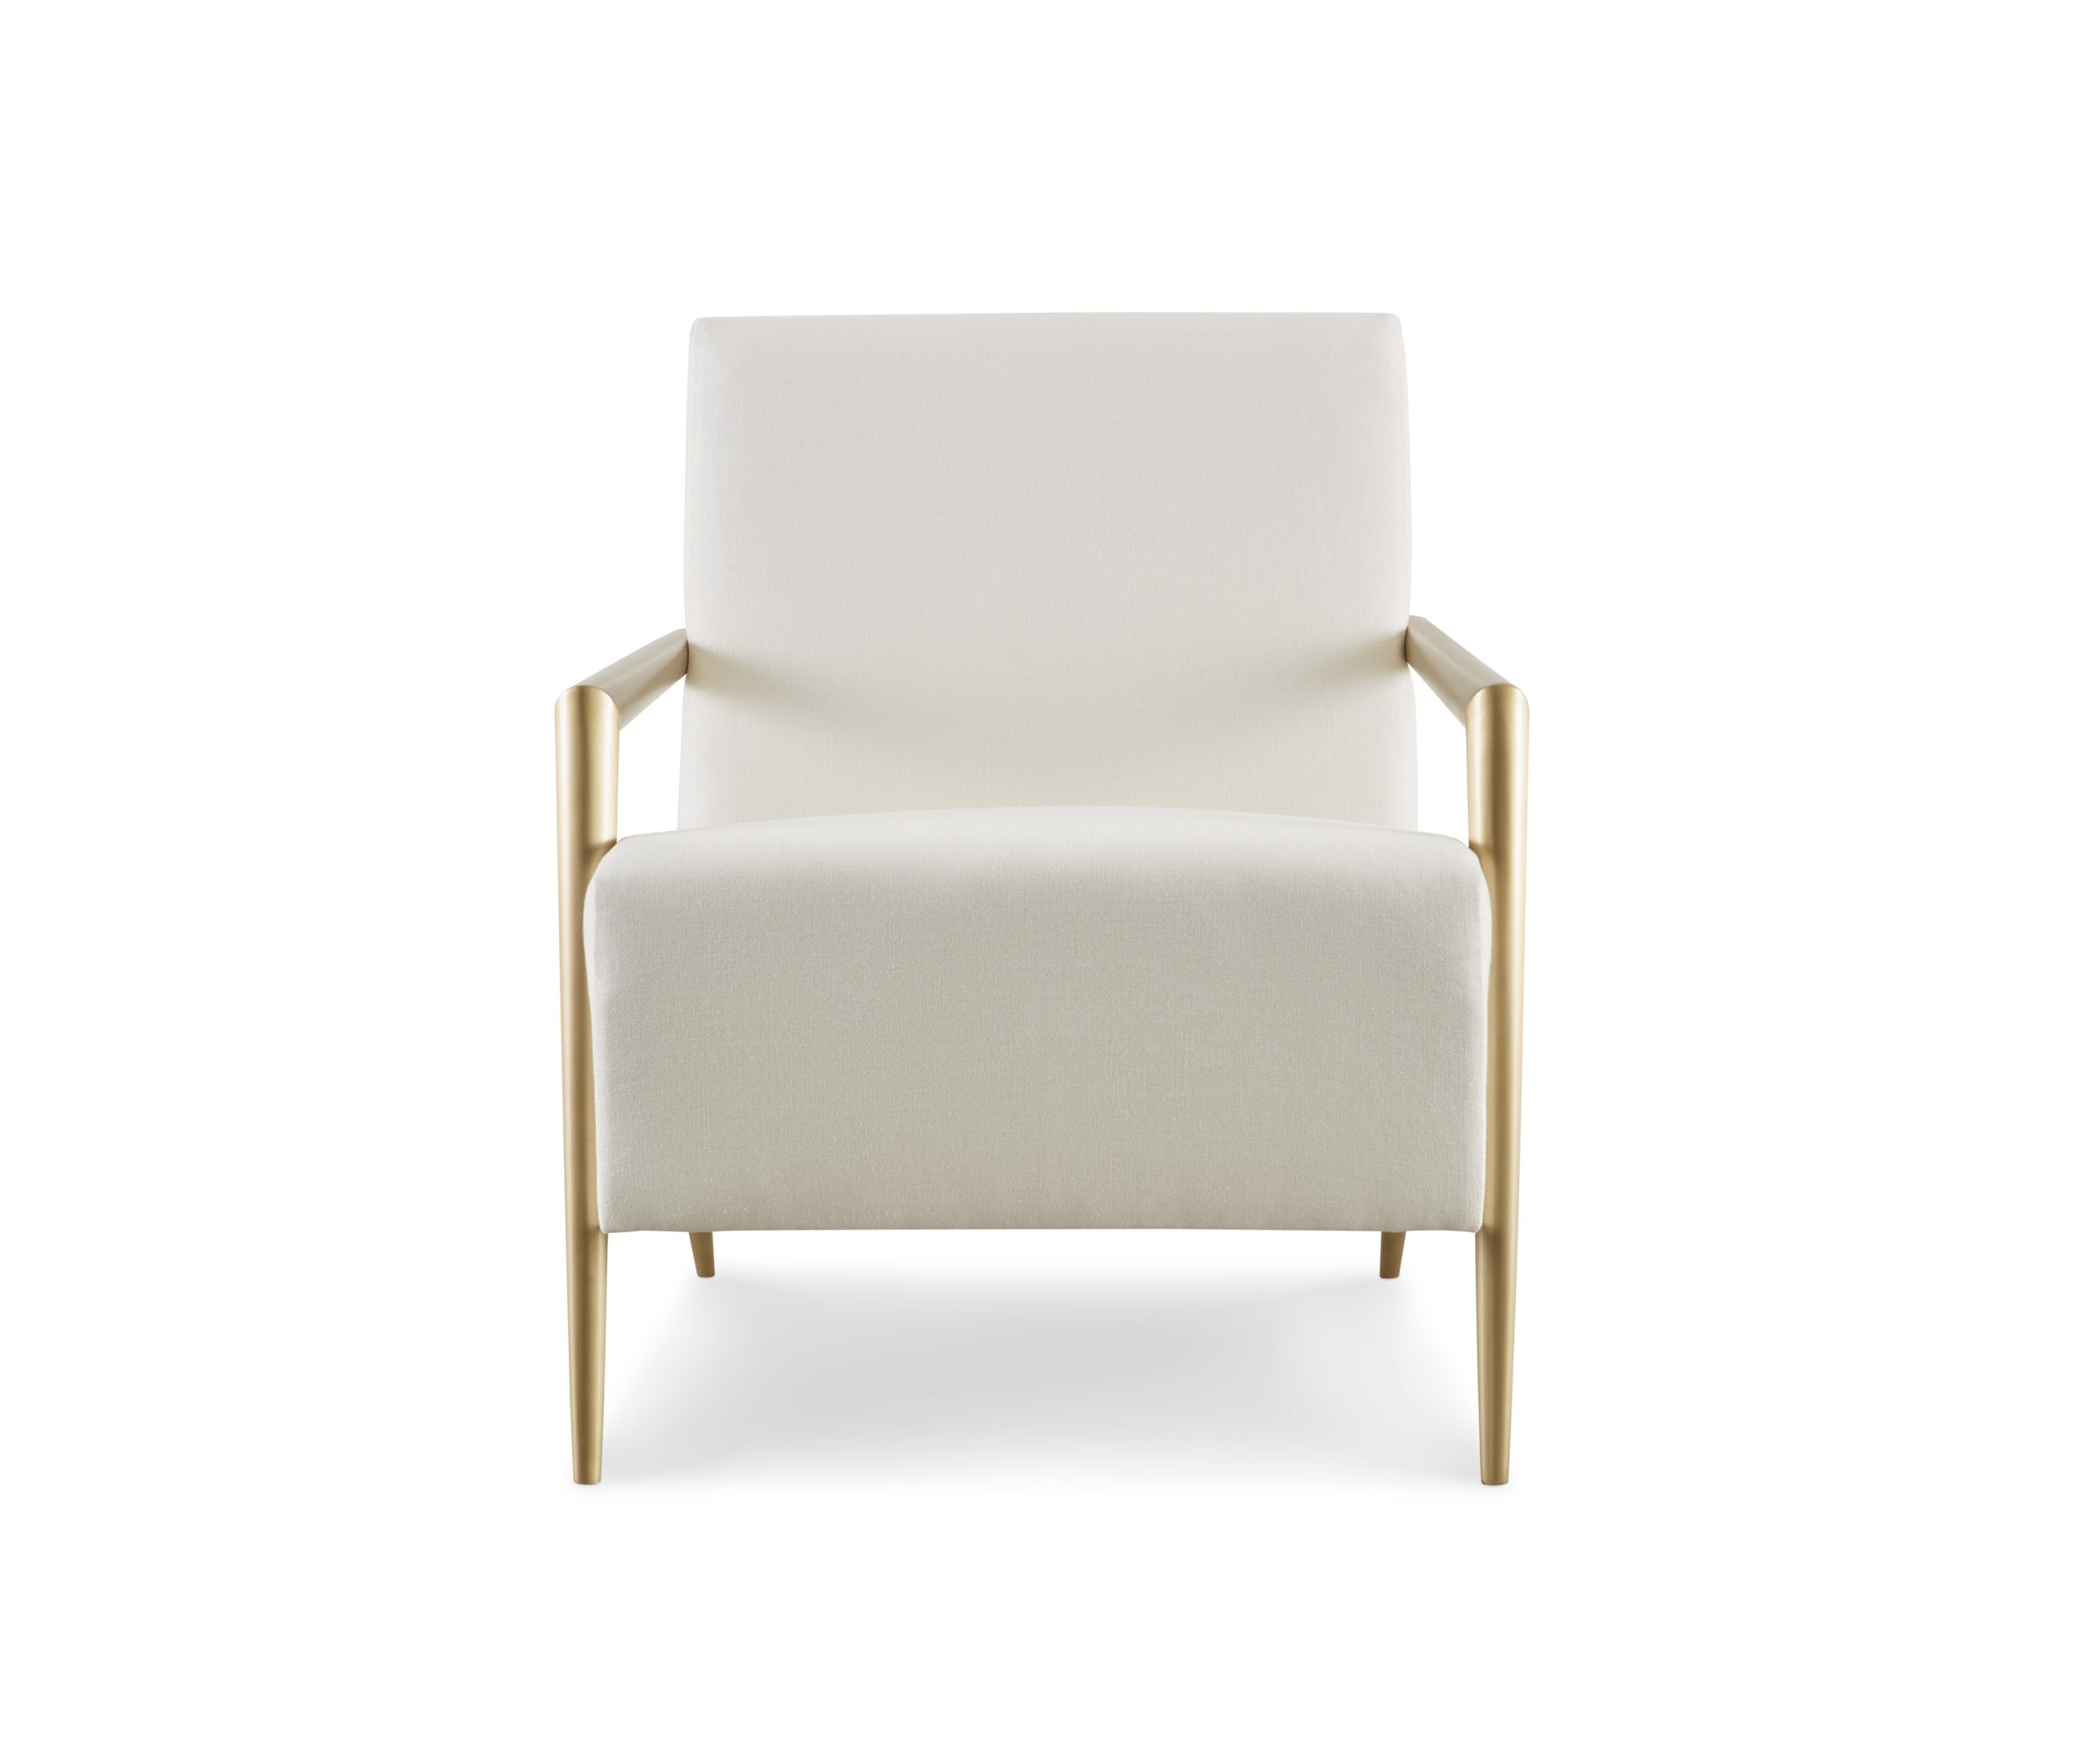 Baker_products_WNWN_enzo_lounge_chair_BAU3104c_FRONT-scaled-2